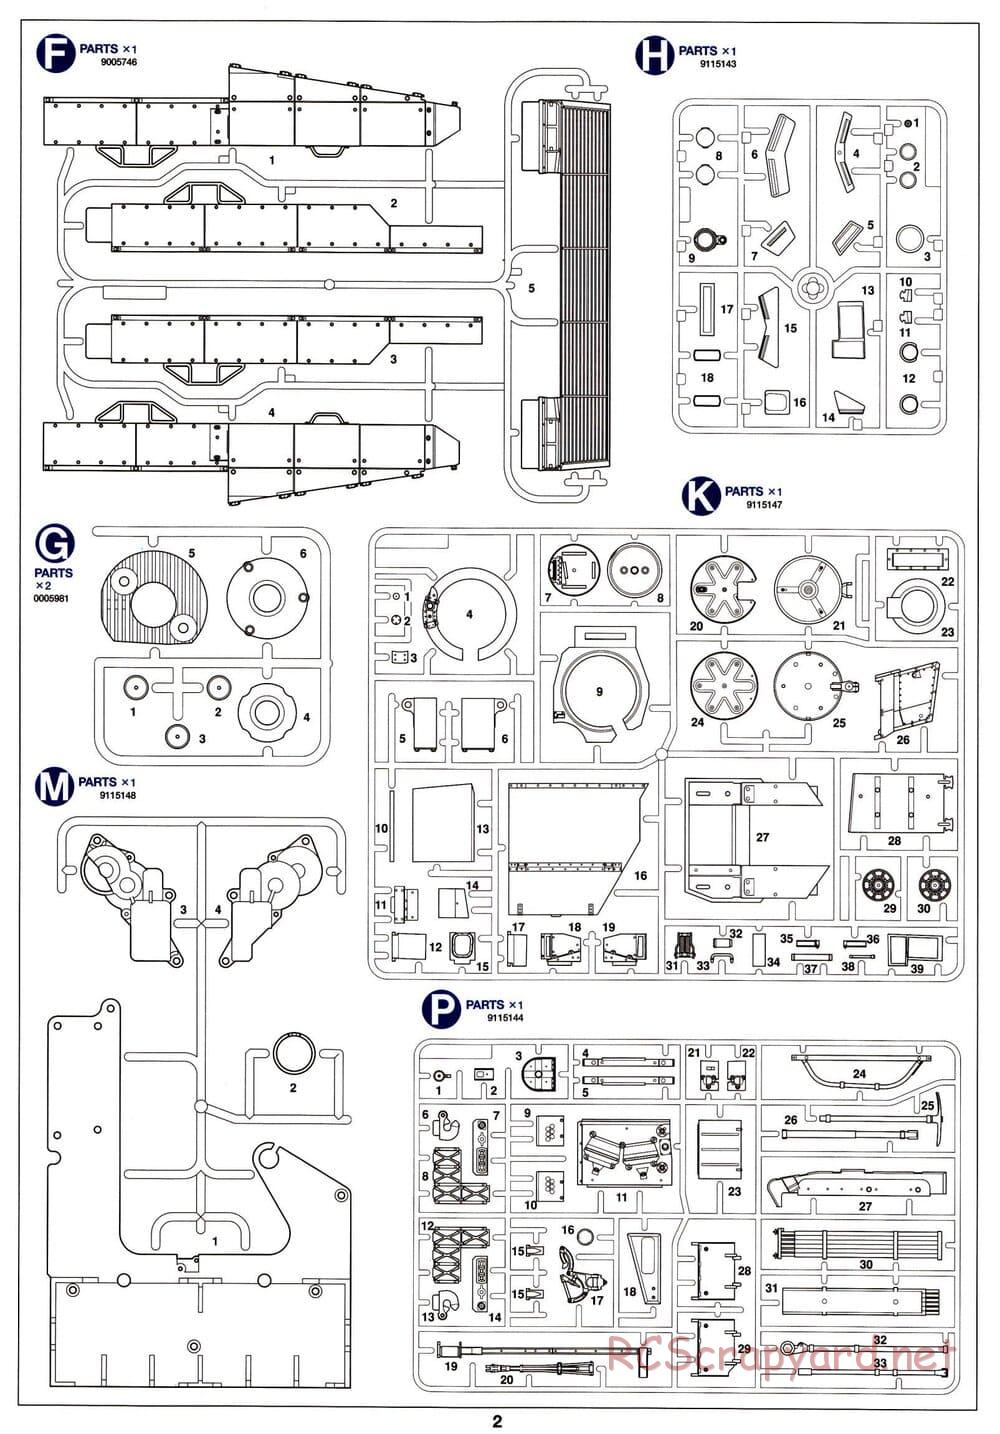 Tamiya - Leopard 2 A6 - 1/16 Scale Chassis - Parts 2